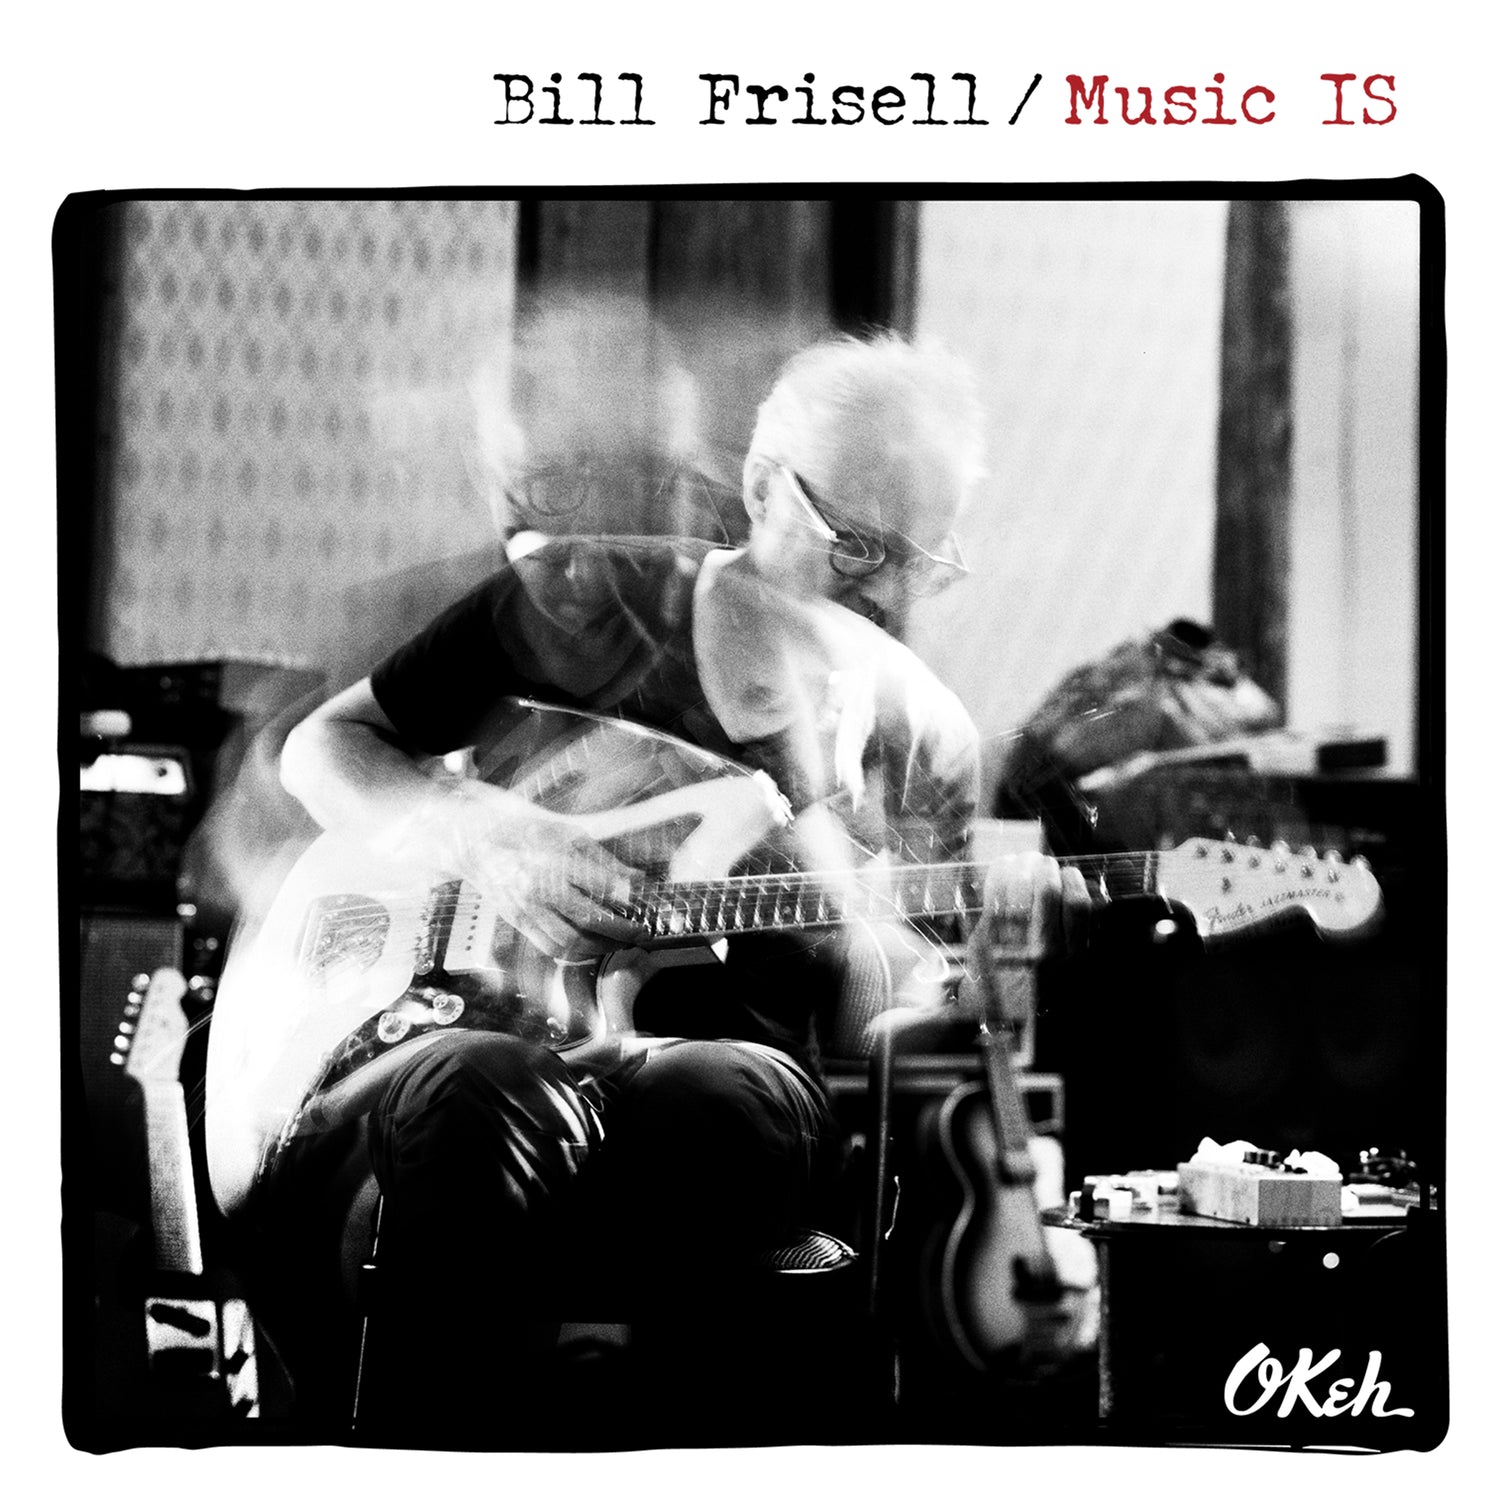 Music IS / Bill Frisell